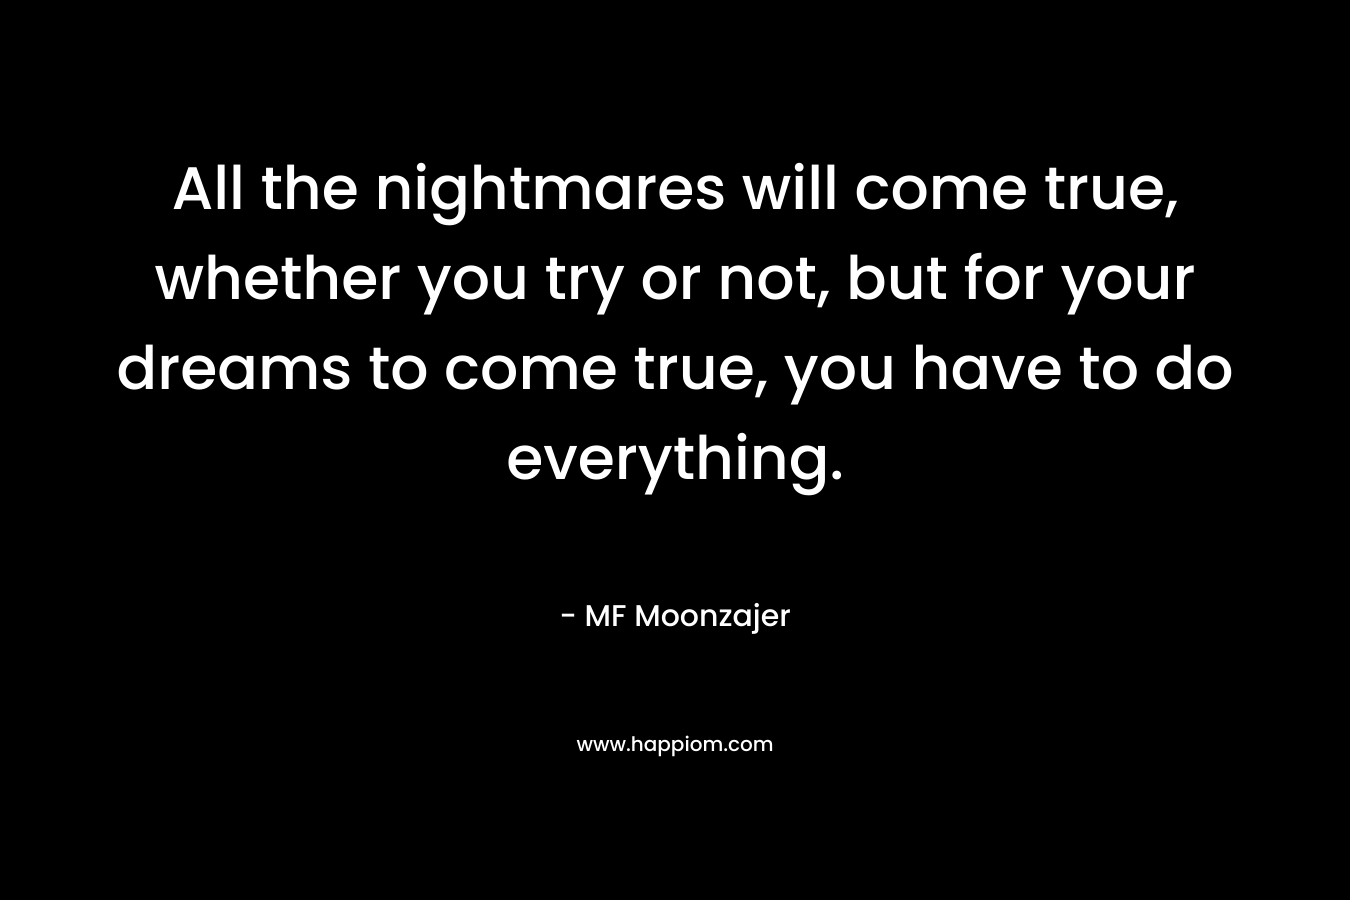 All the nightmares will come true, whether you try or not, but for your dreams to come true, you have to do everything.